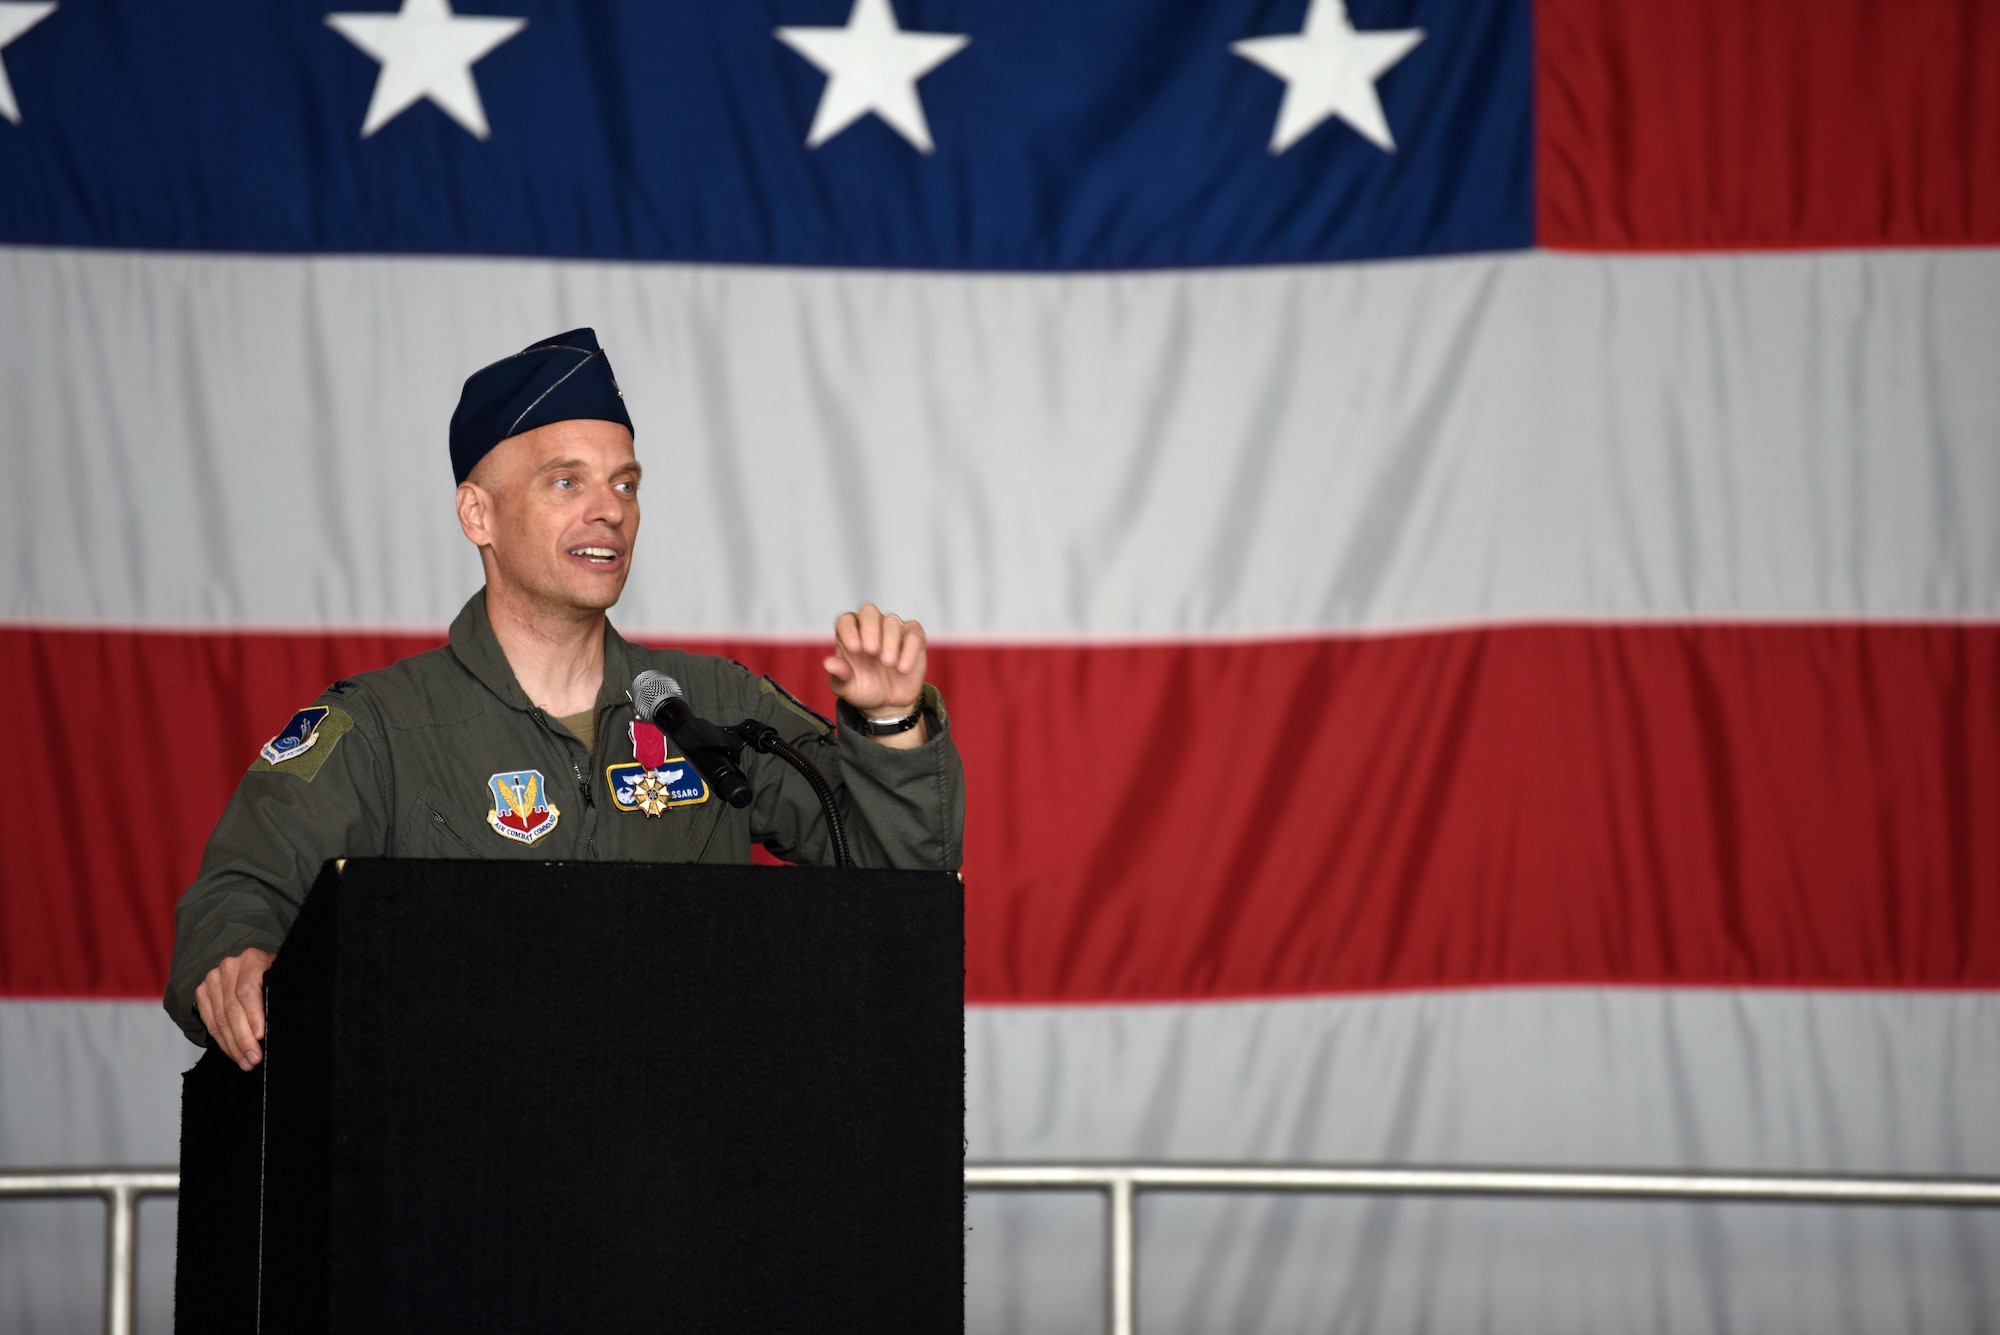 Col. Mark Massaro addresses the 495th Fighter Group during a change of command ceremony where he relinquished command to Col. John Galloway Jr. at Shaw Air Force Base, South Carolina, June 29, 2022. Brig. Gen. David Mineau, 15th Air Force vice commander, presided over the ceremony. (U.S. Air Force photo by Master Sgt. Andrew Satran)